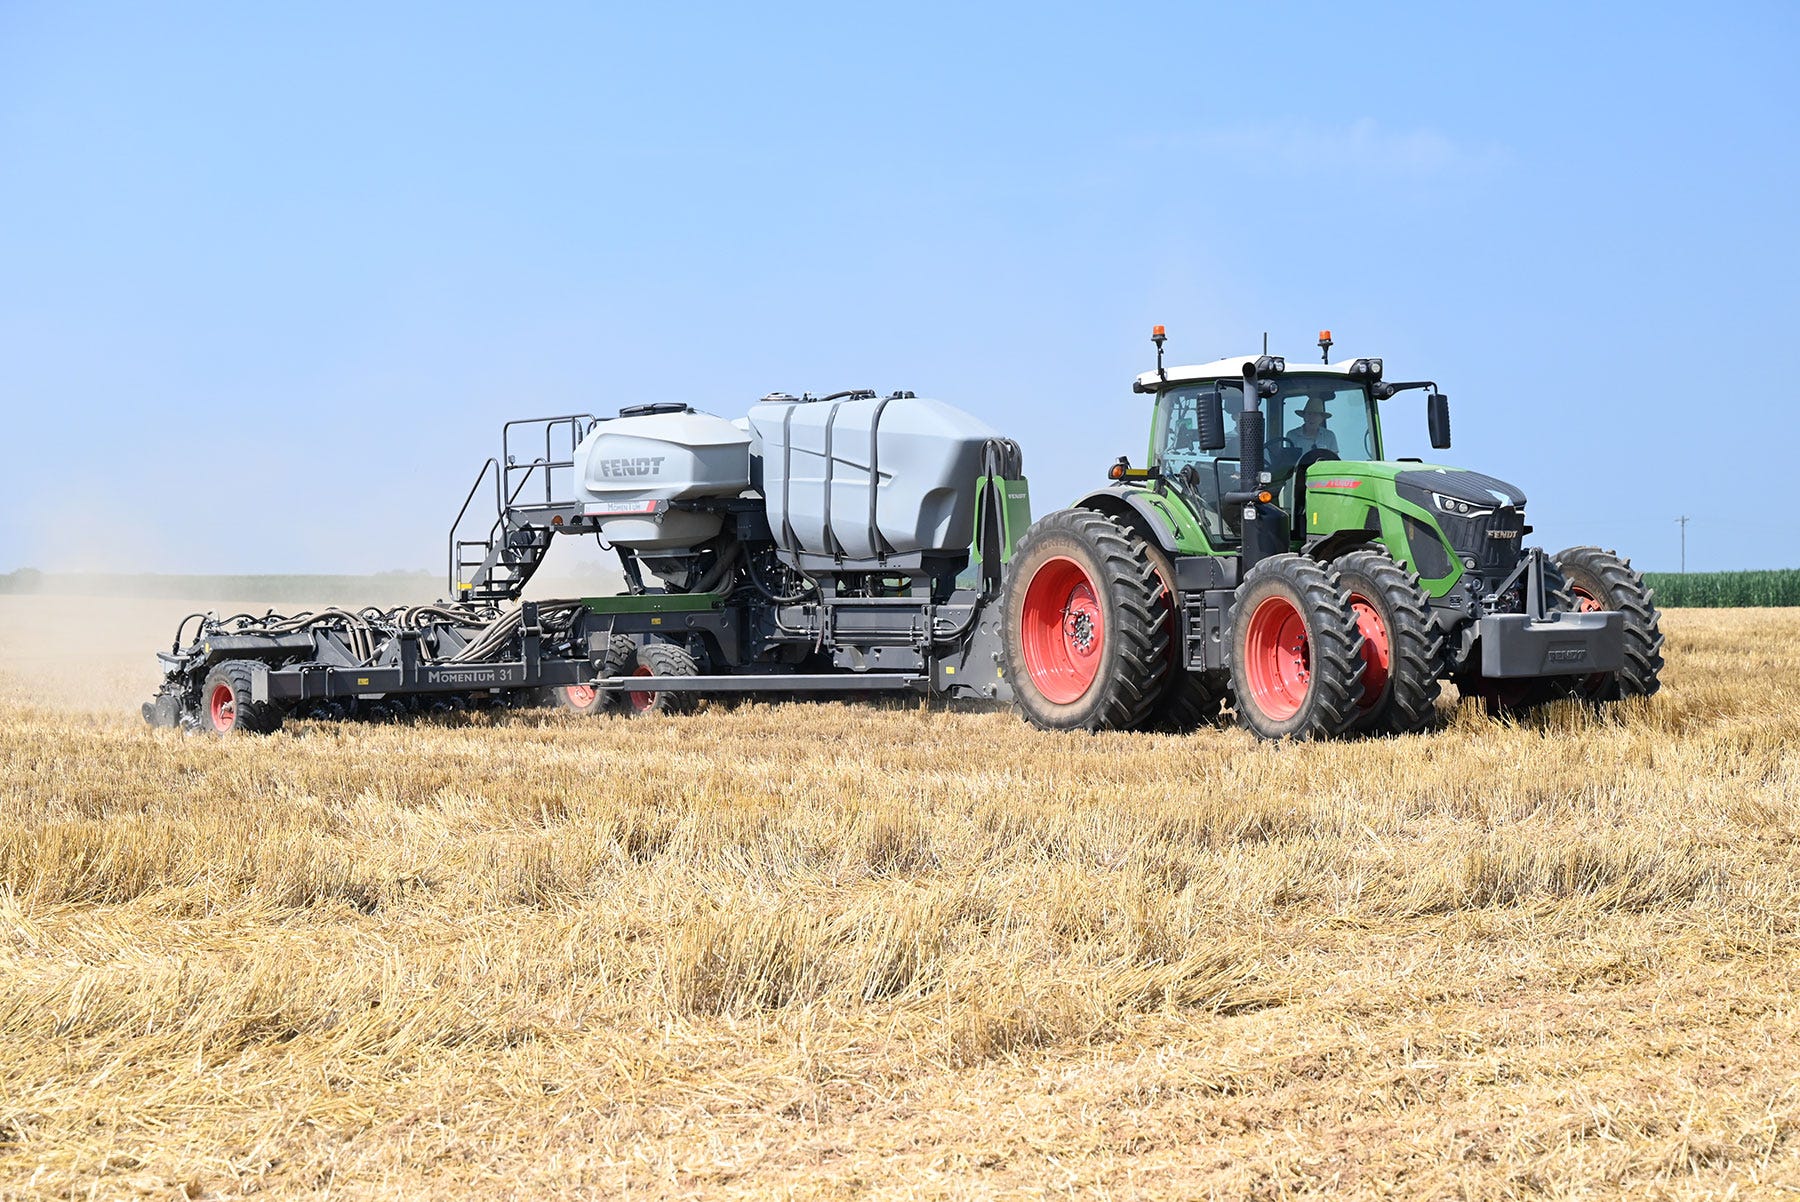 Fendt tractor and Momentum planter in a field